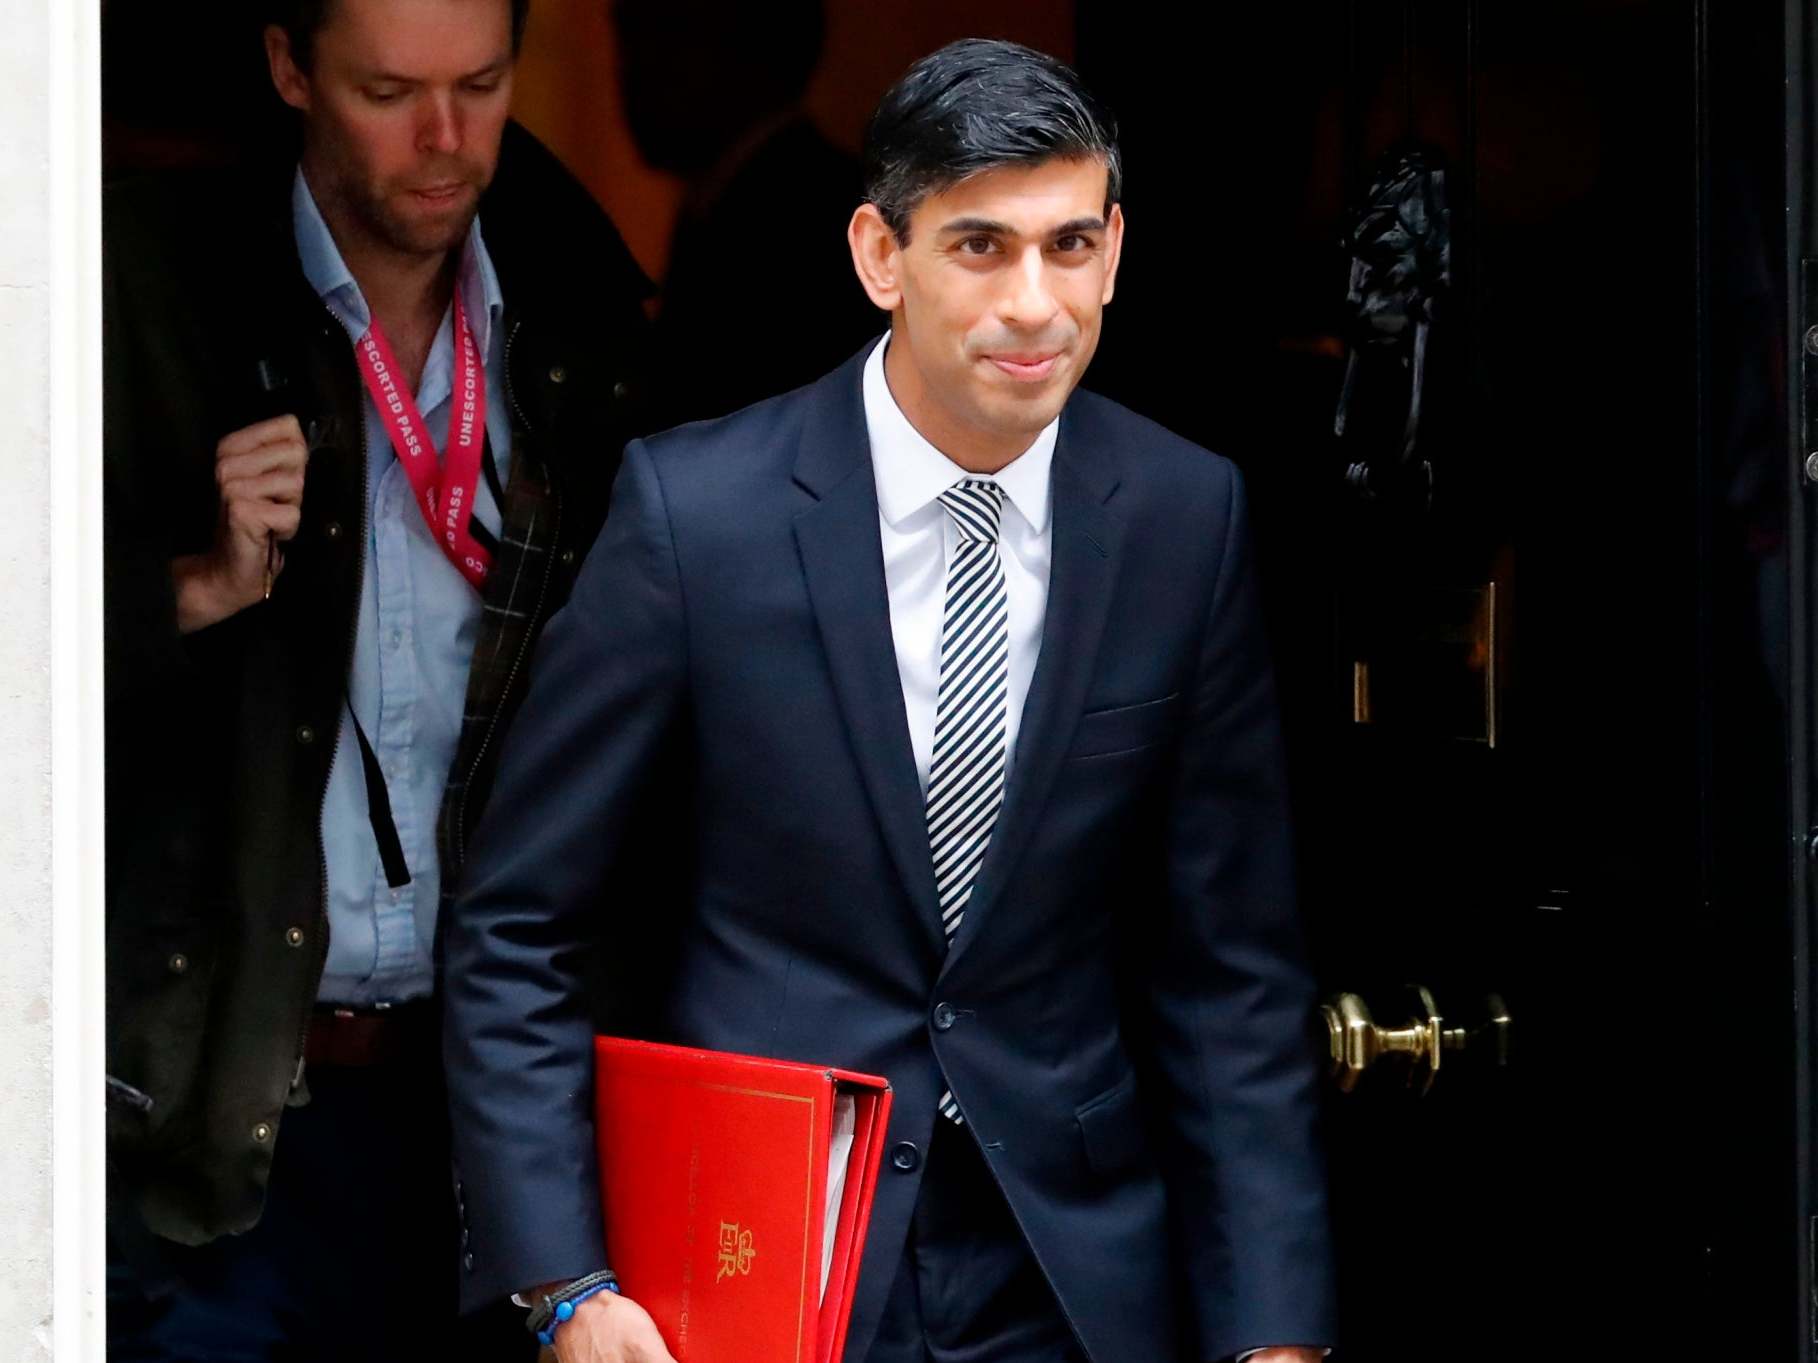 Rishi Sunak, the chancellor, will go through the motions, standing up and making a speech in parliament on Wednesday